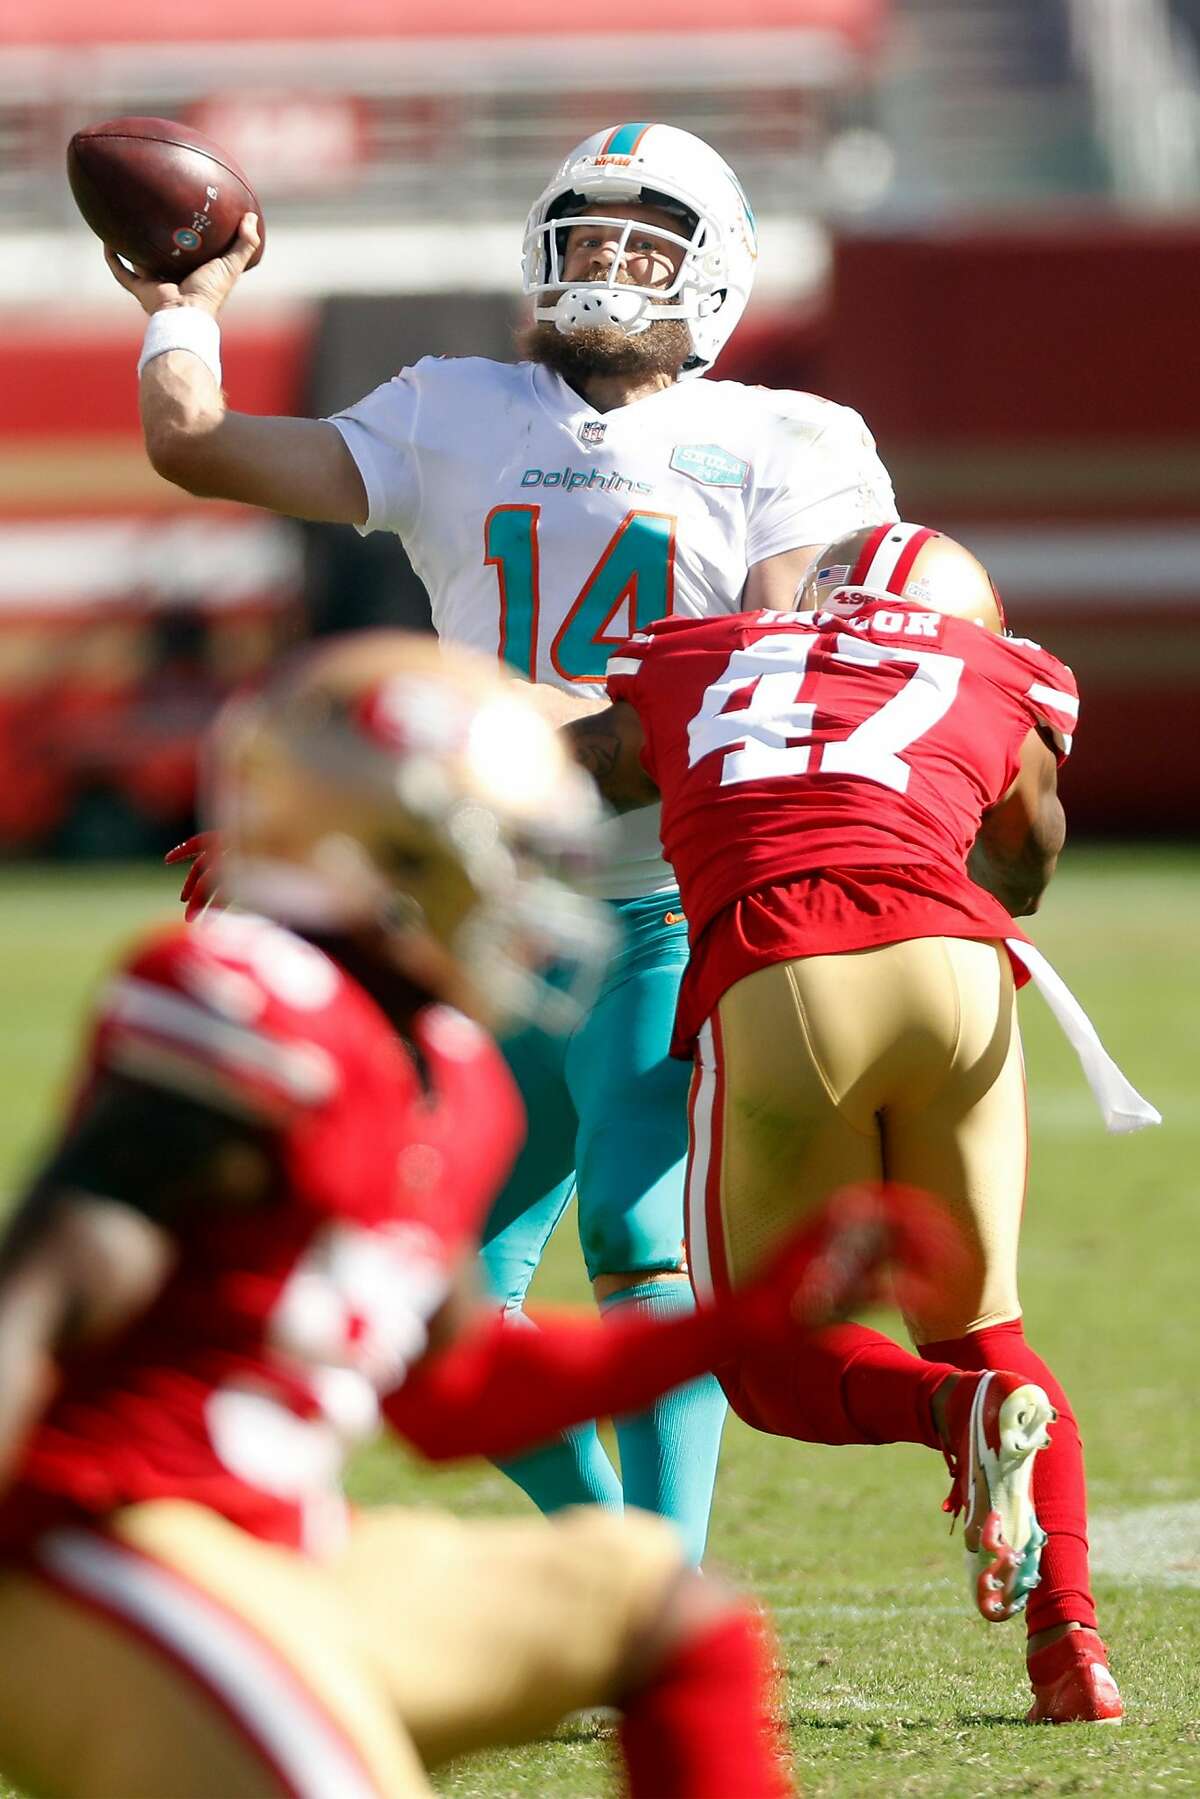 Fitzpatrick's 3 TD passes lead Dolphins past 49ers 43-17